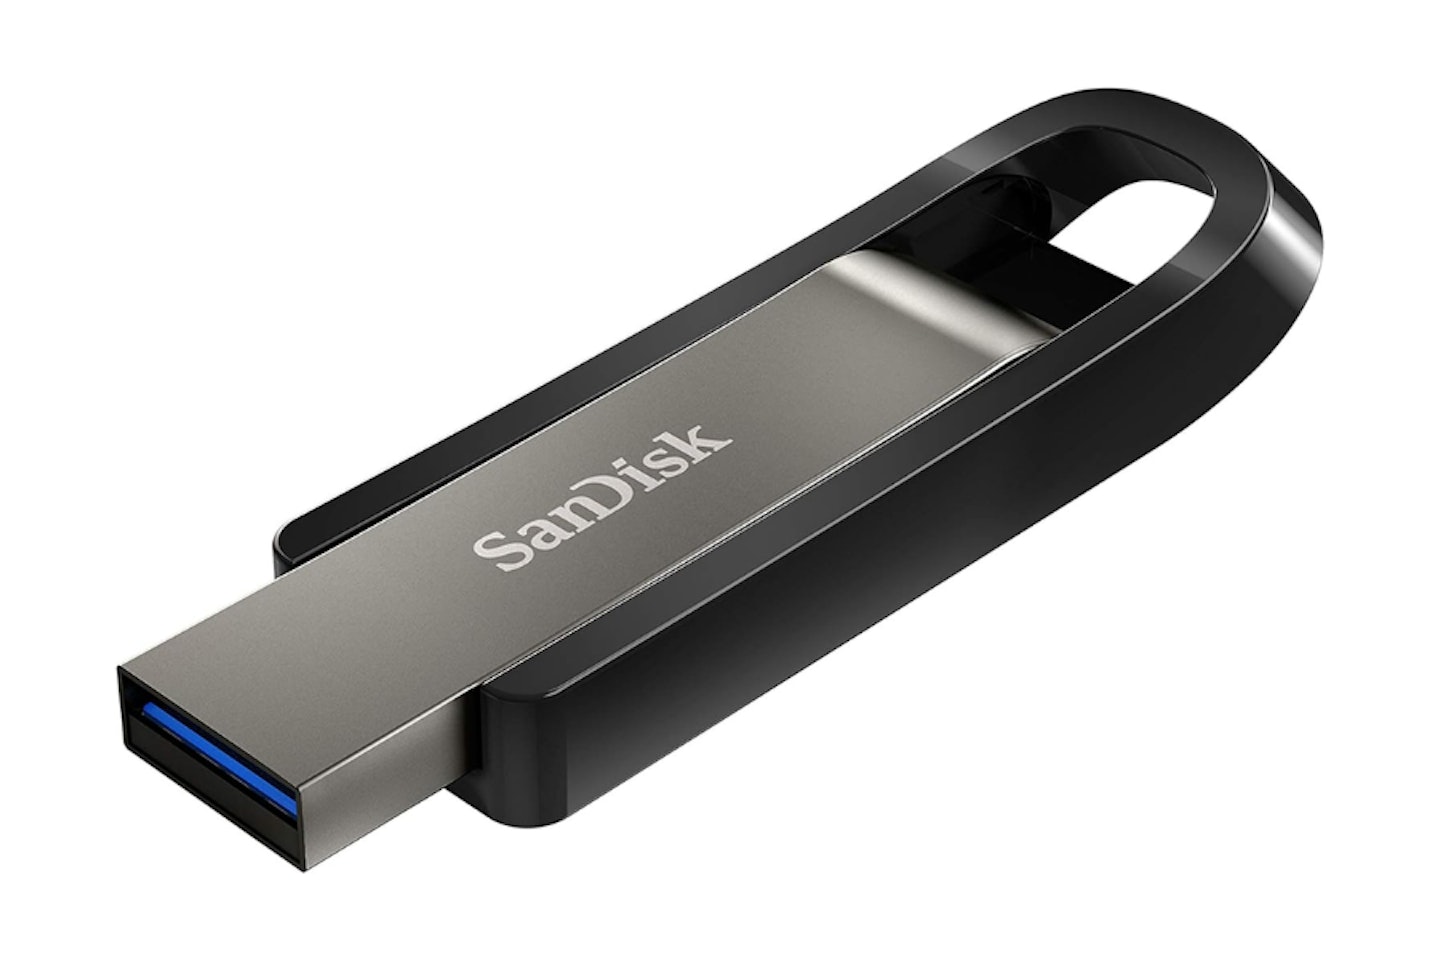 SanDisk Extreme Go 128GB USB 3.2 Type-A Flash Drive- one of the best SanDisk USB stick devices